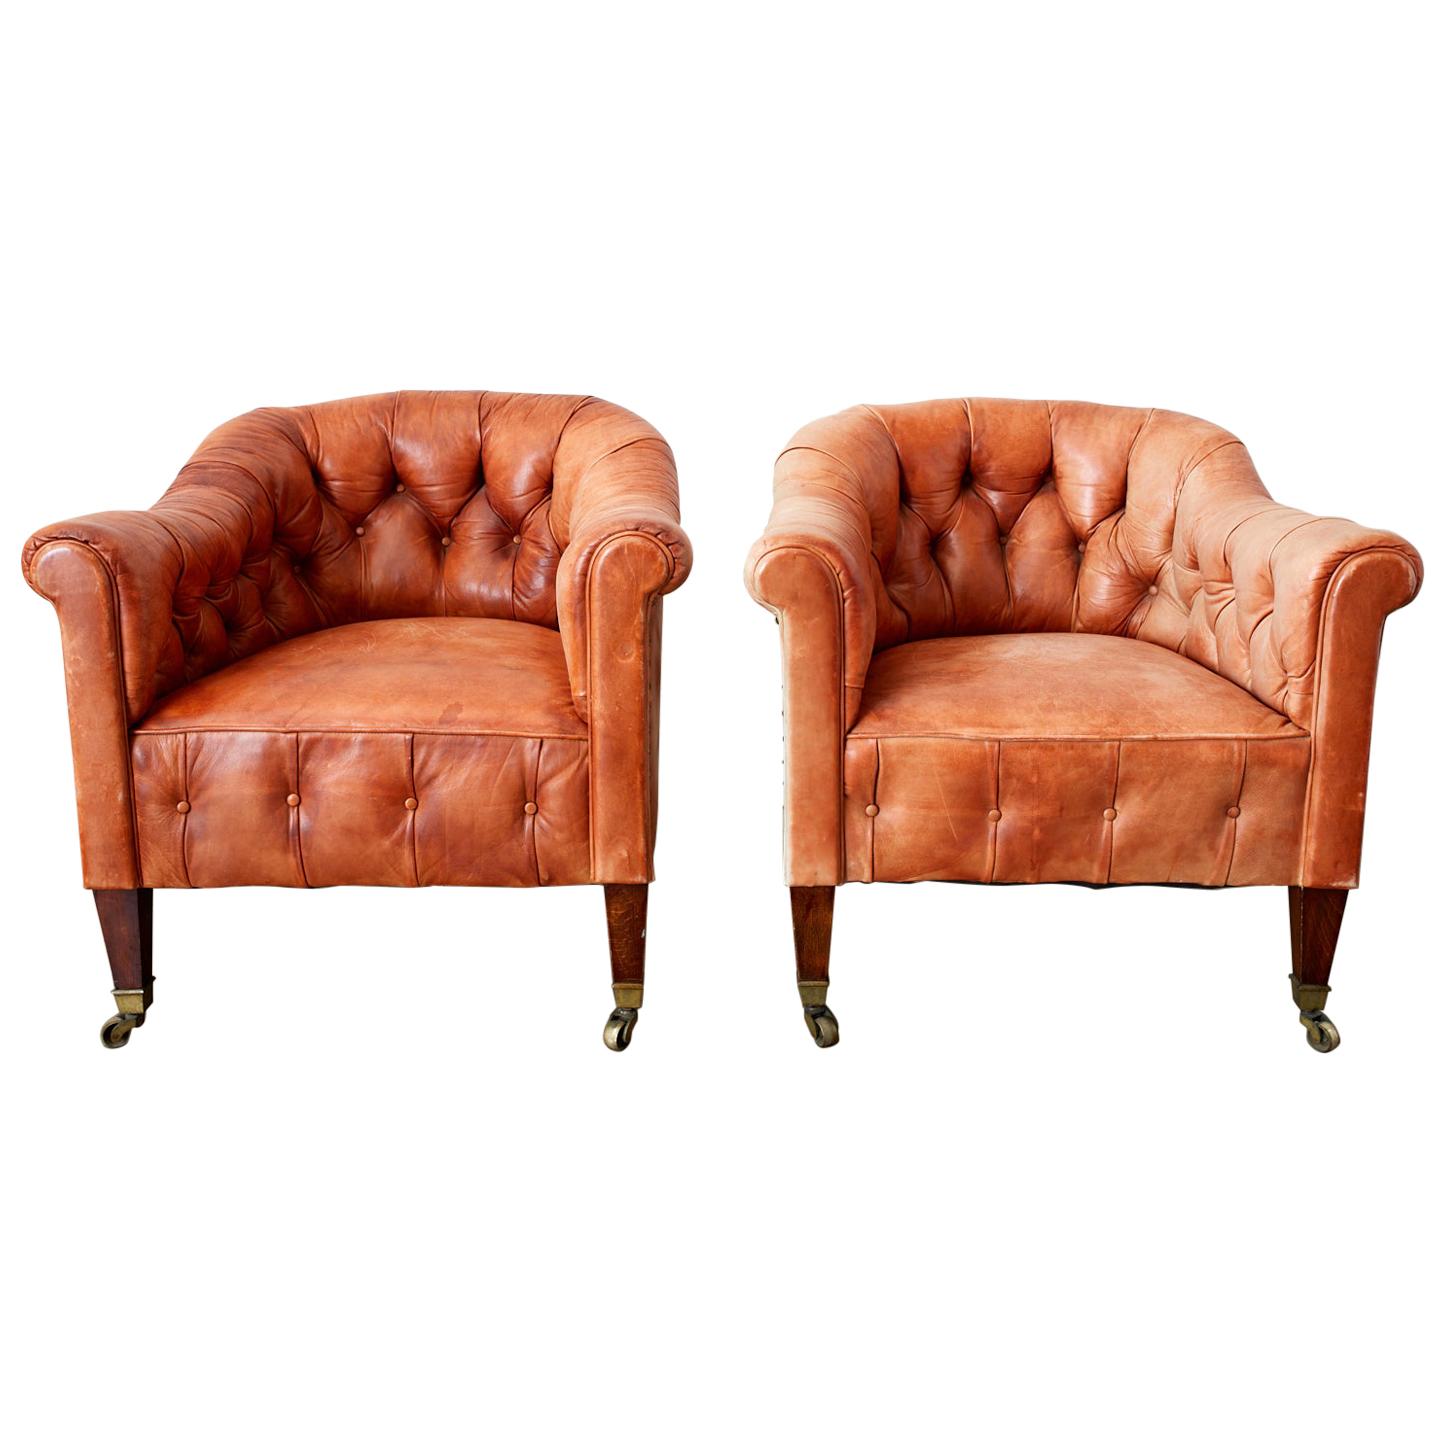 Pair of English Tufted Leather Chesterfield Club Chairs